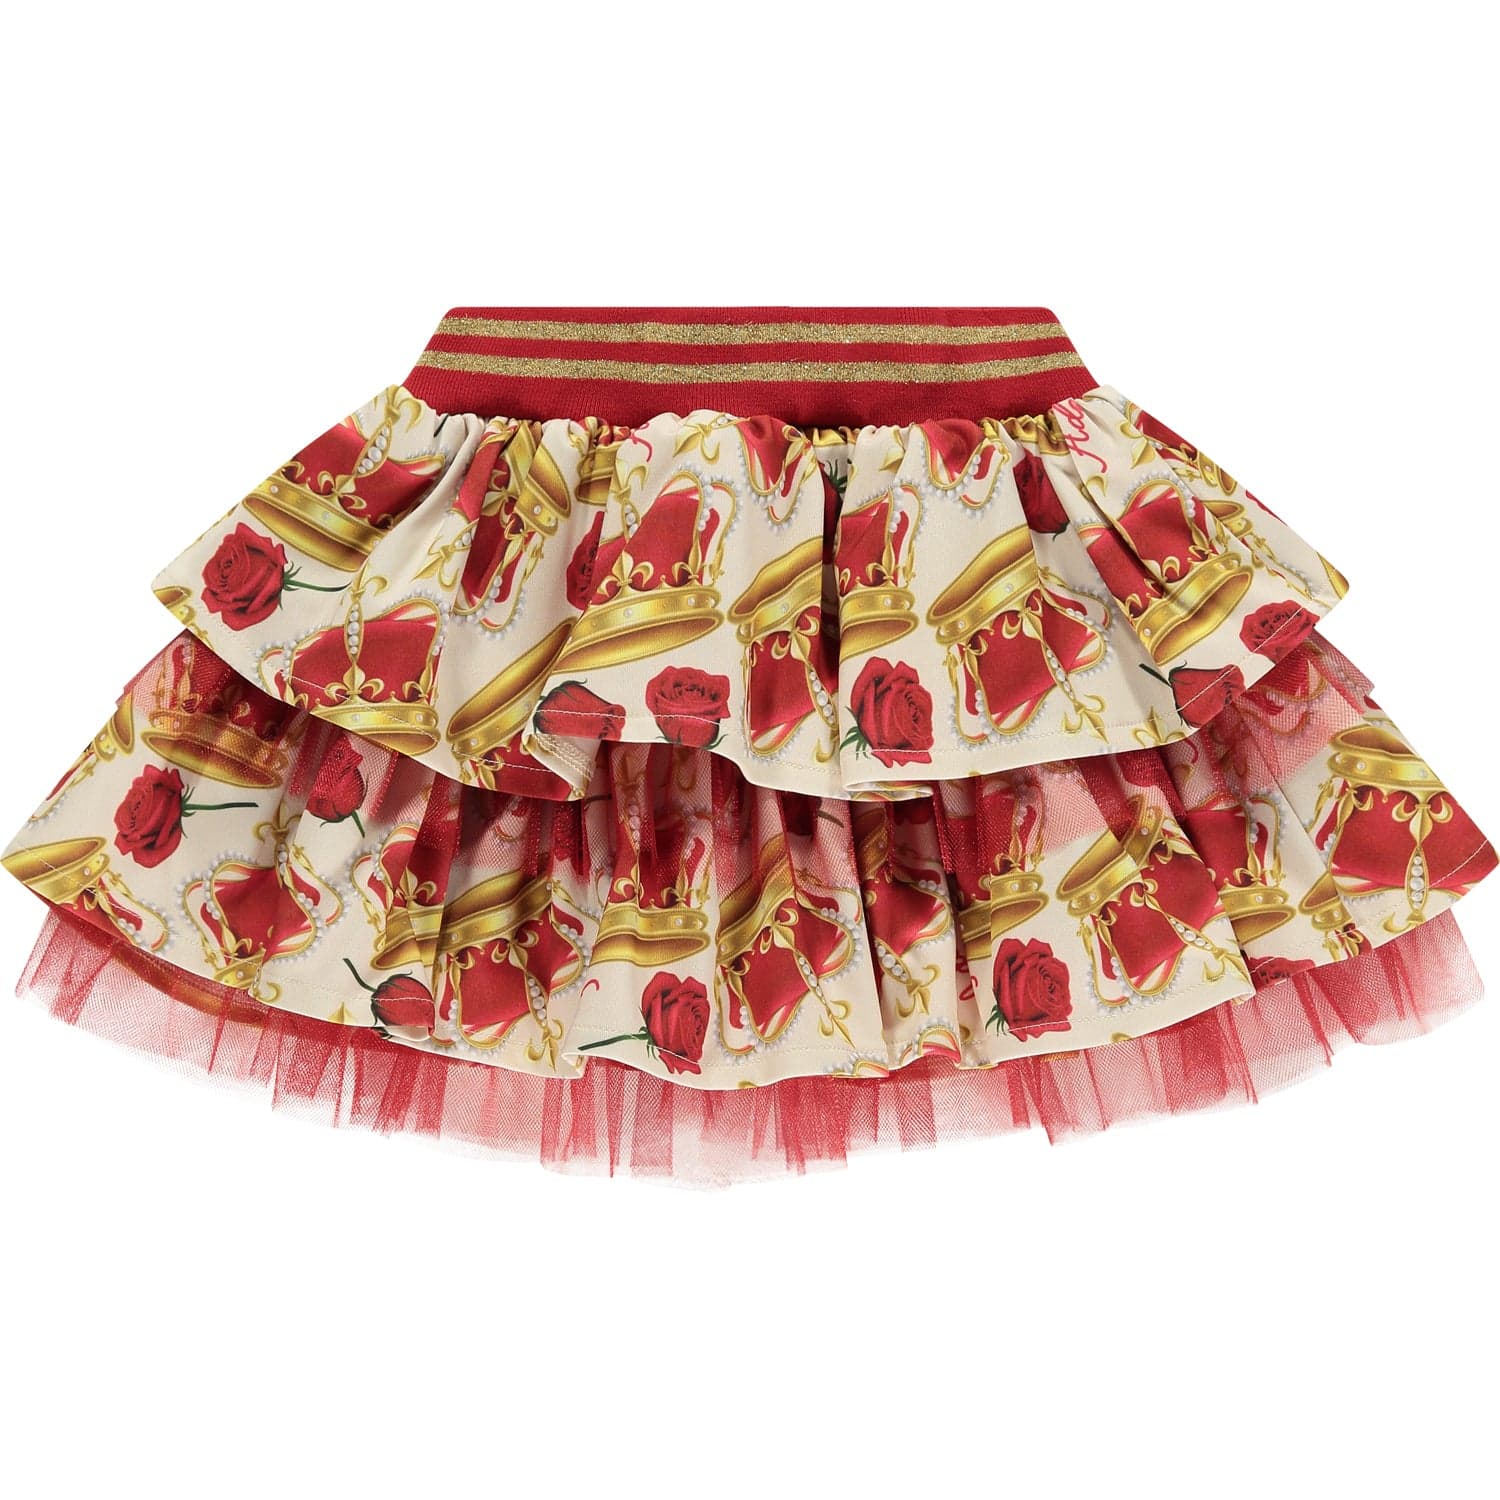 A-Dee Tops & Skirts A-Dee Red Caitlyn Crown skirt set